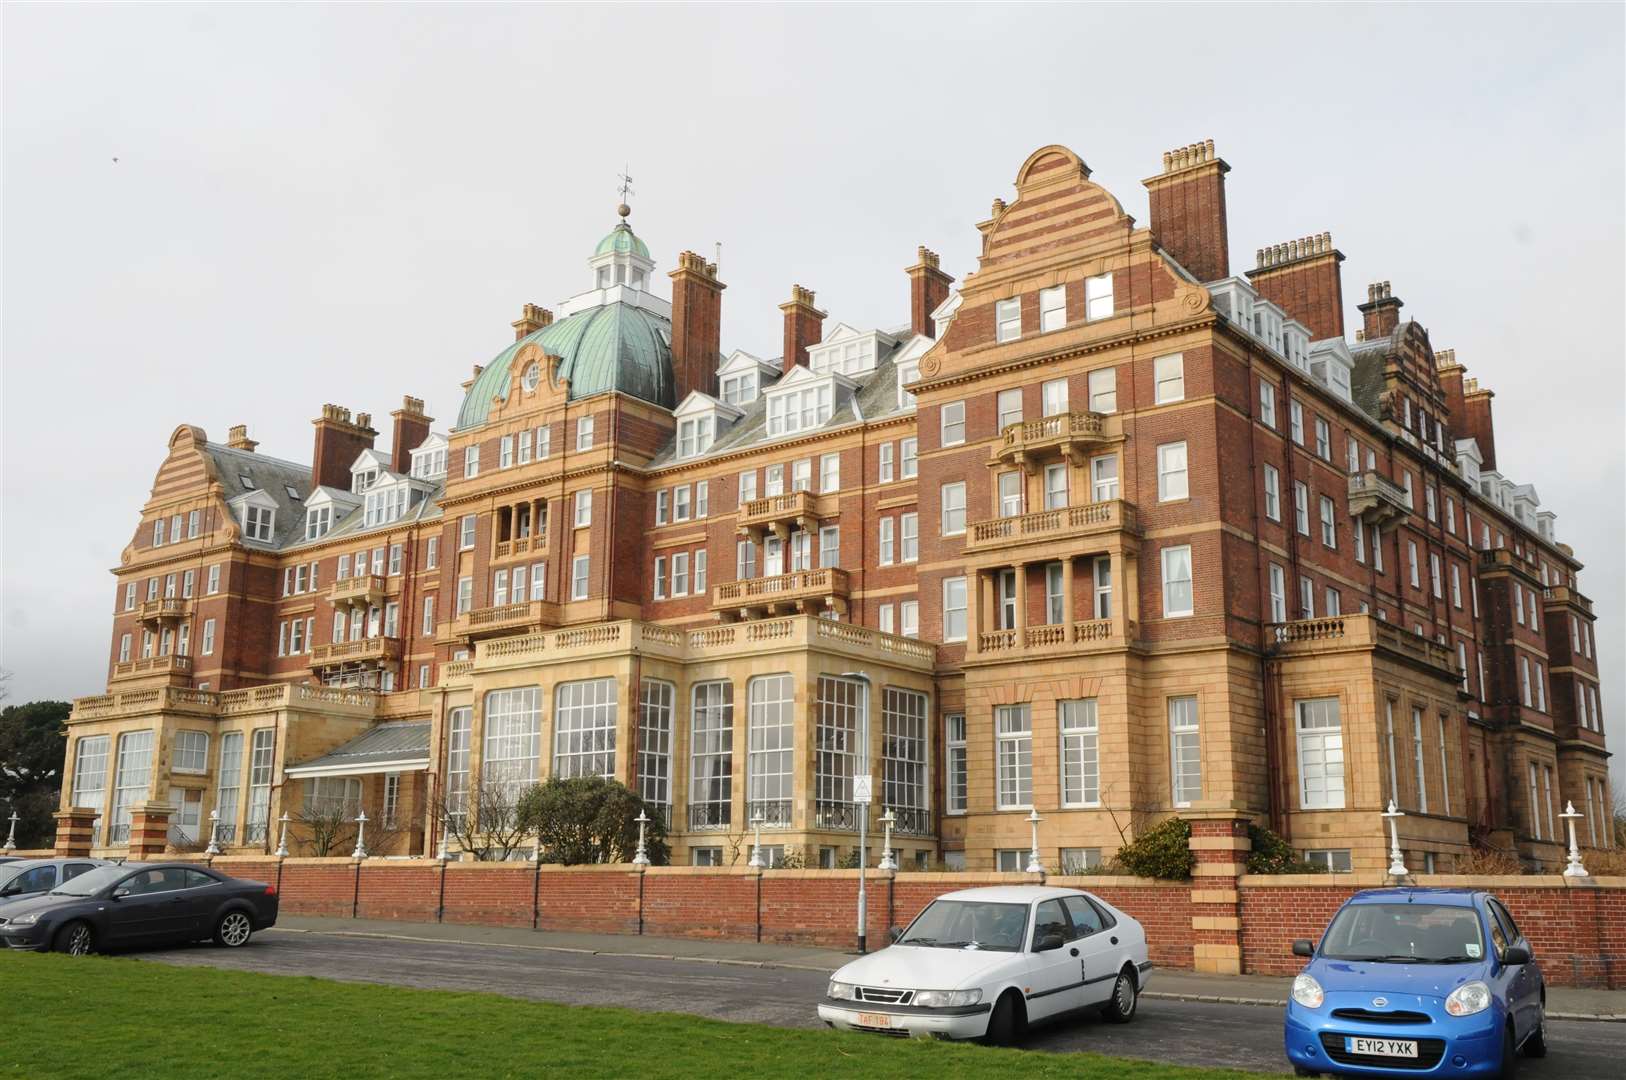 Mr Holland lived in his later years at the Metropole, Folkestone